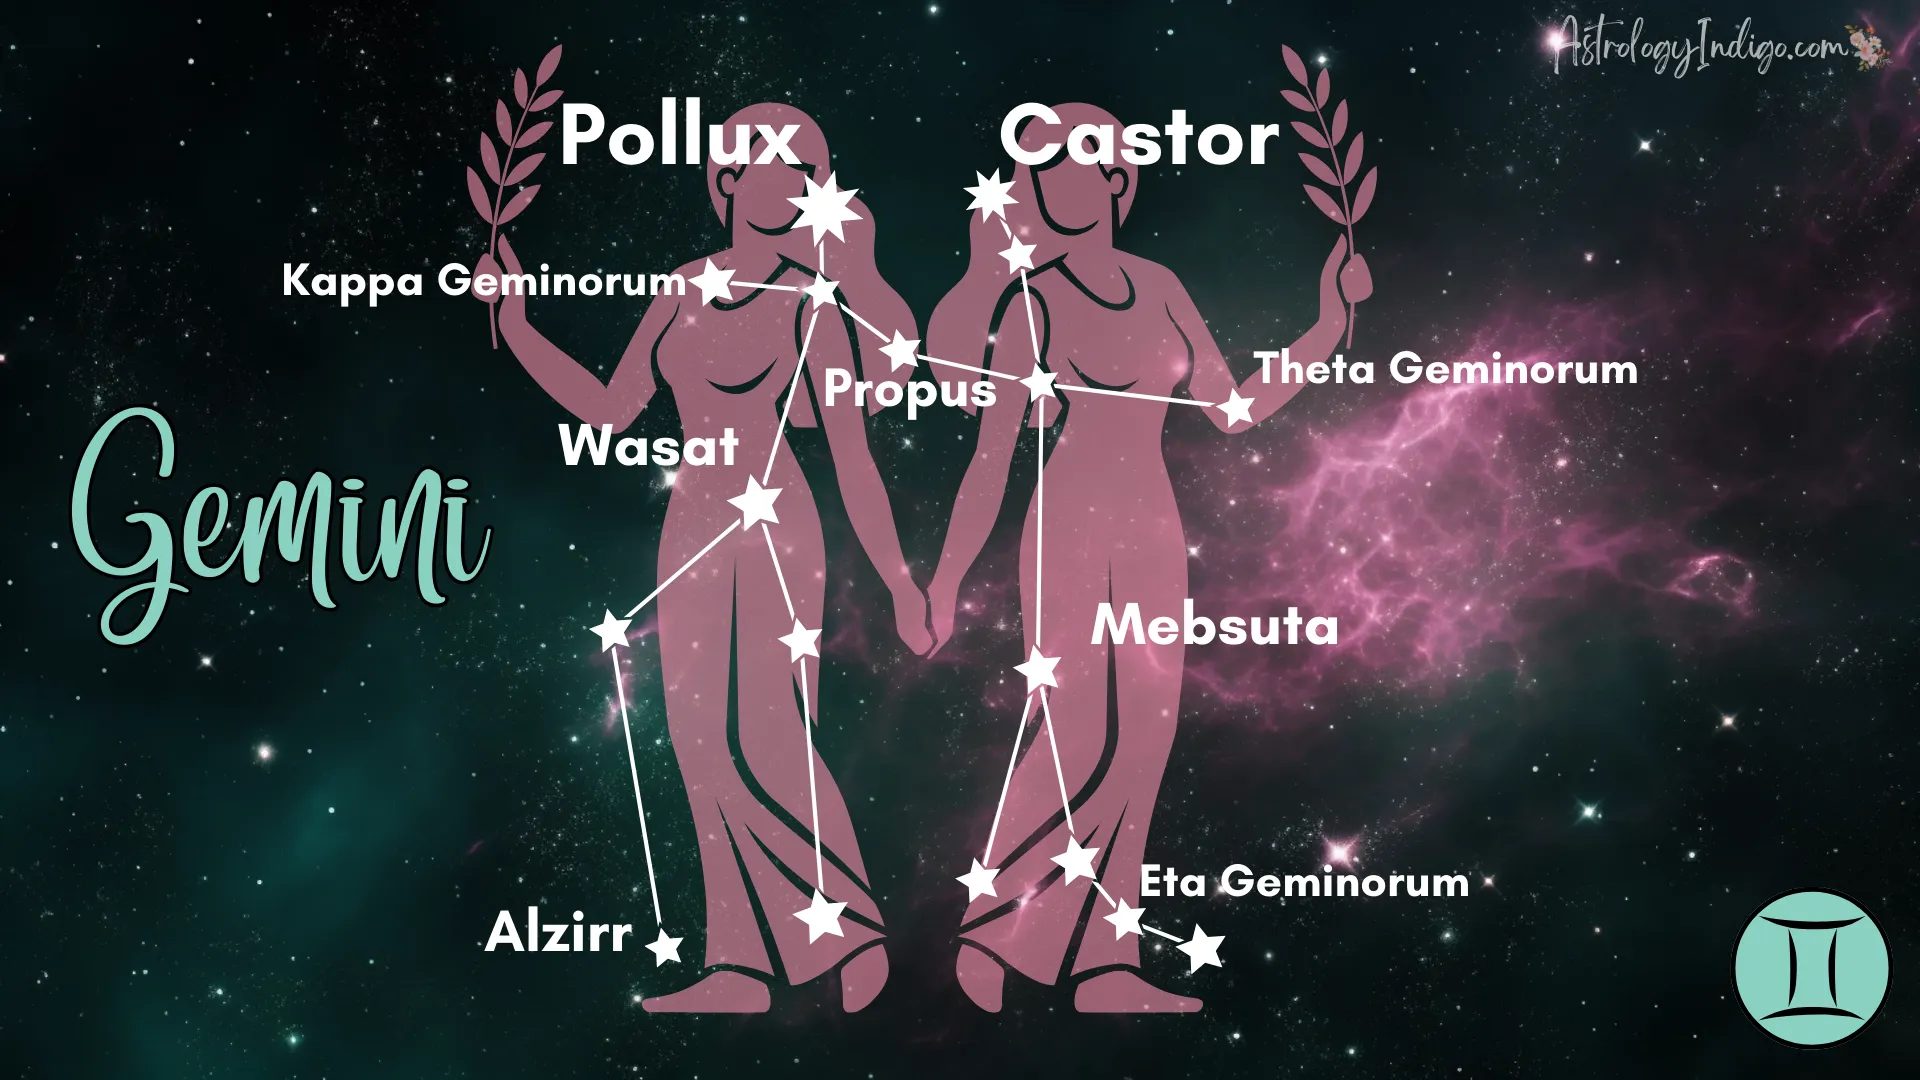 The Gemini constellation with information about the stars and a pink image of the Twins behind it.